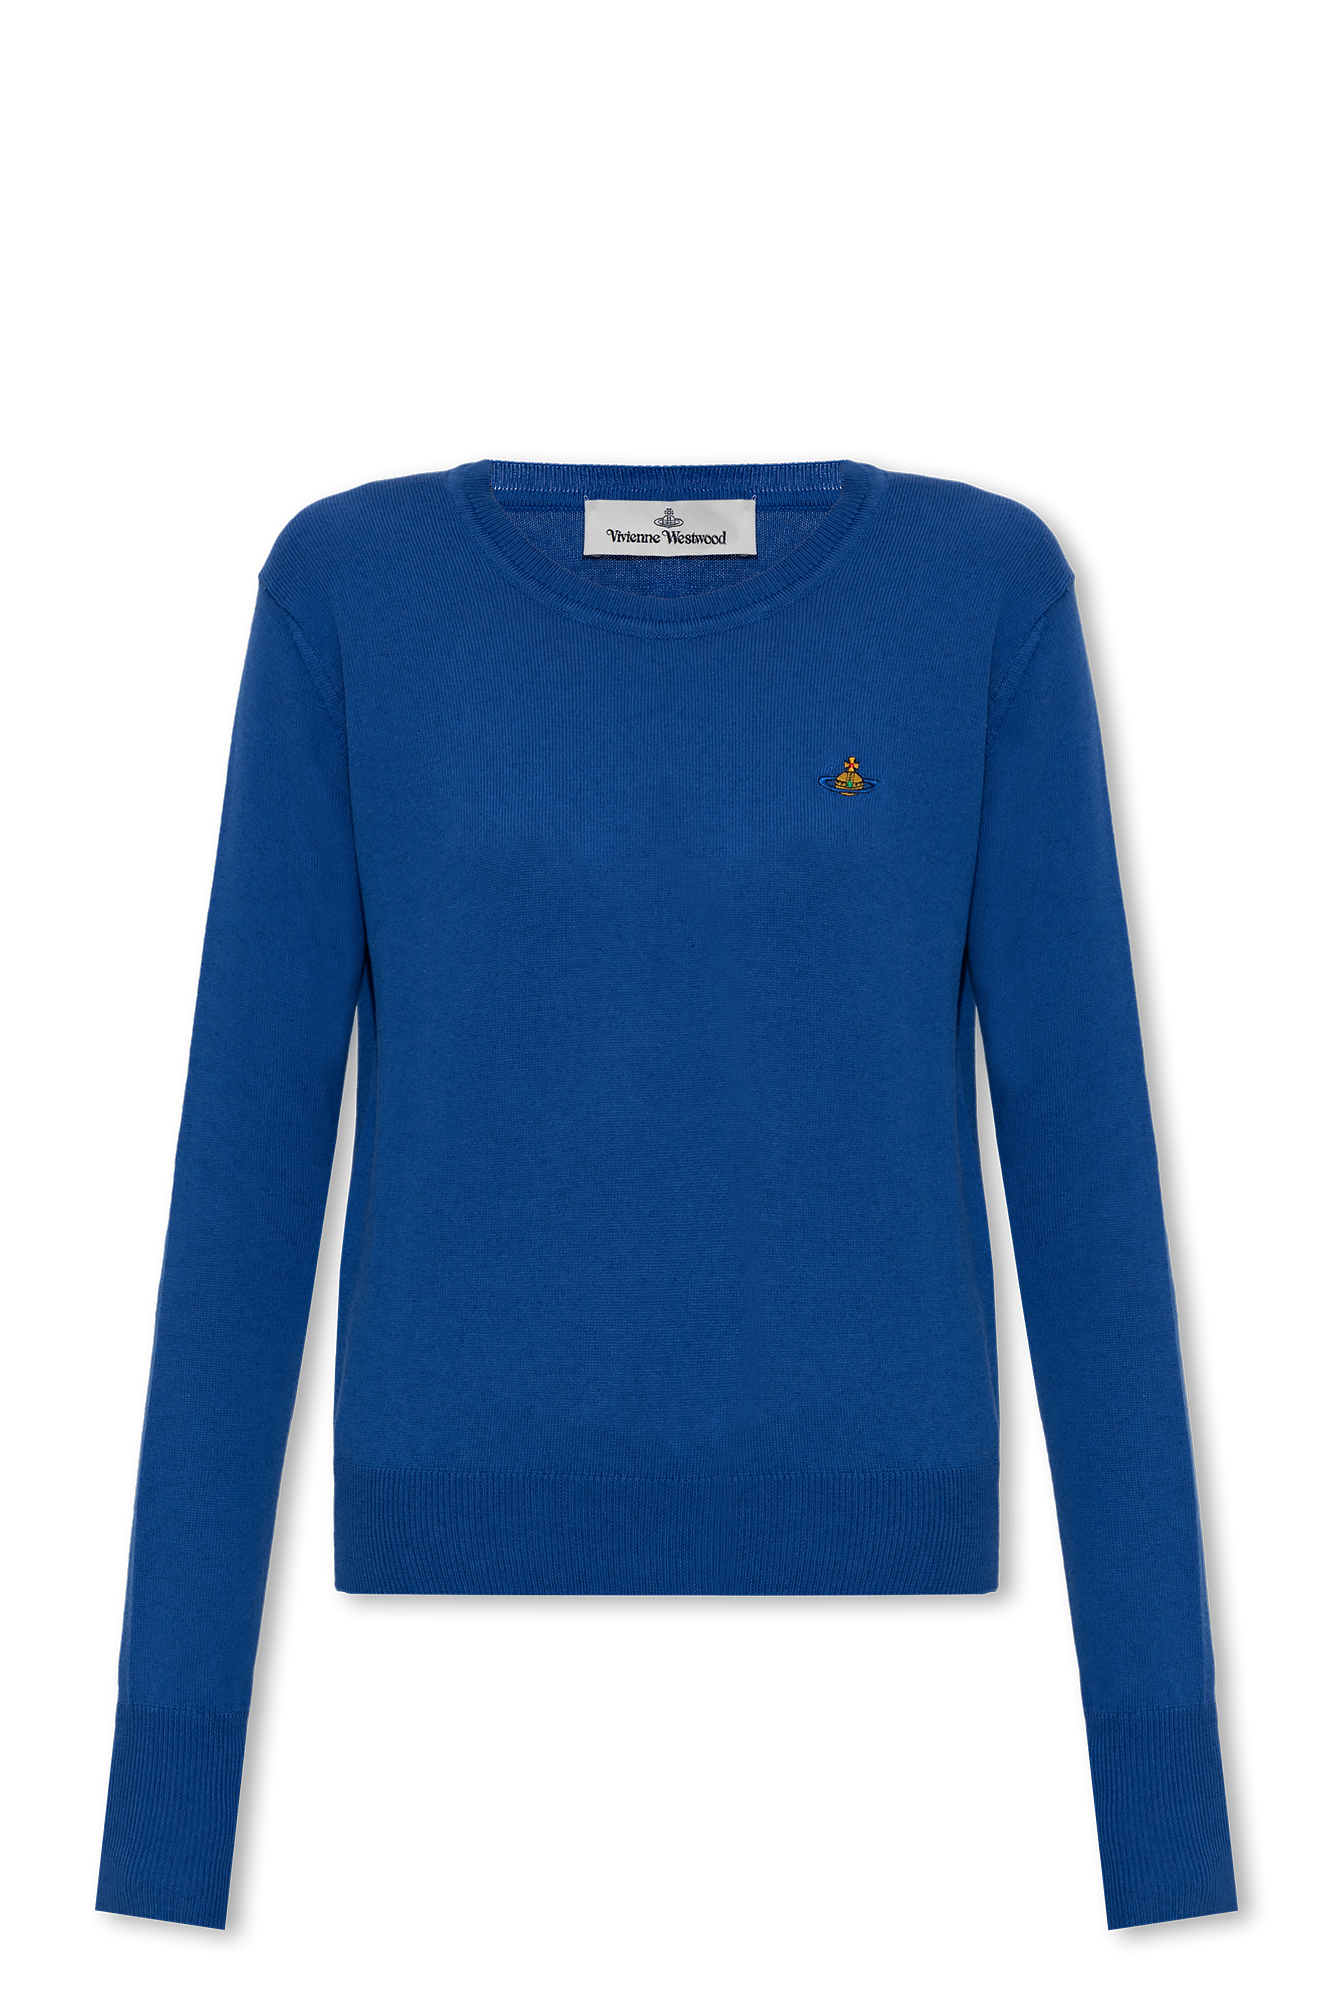 Vivienne Westwood ‘Bea’ sweater with logo